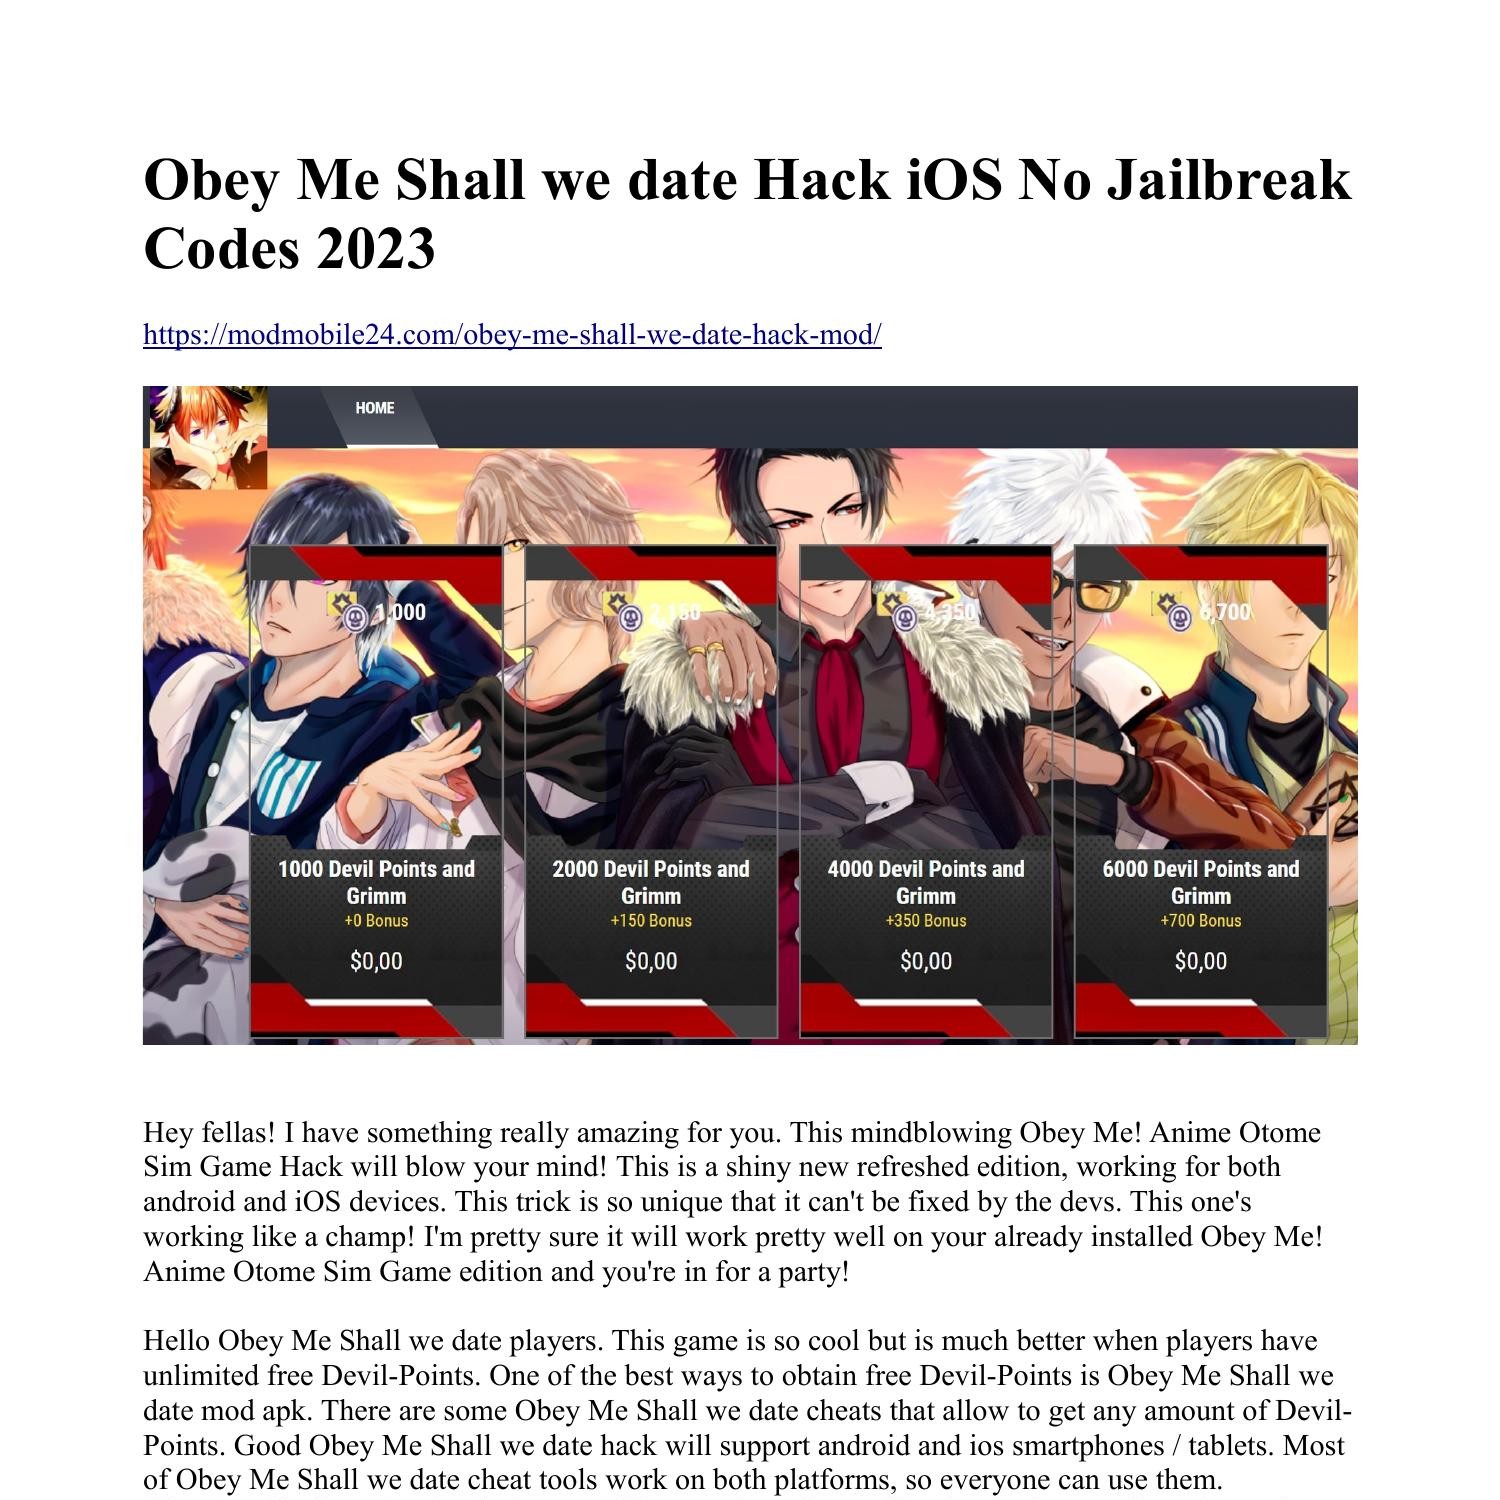 Obey Me Shall we date Hack iOS No Jailbreak Codes 2023.pdf